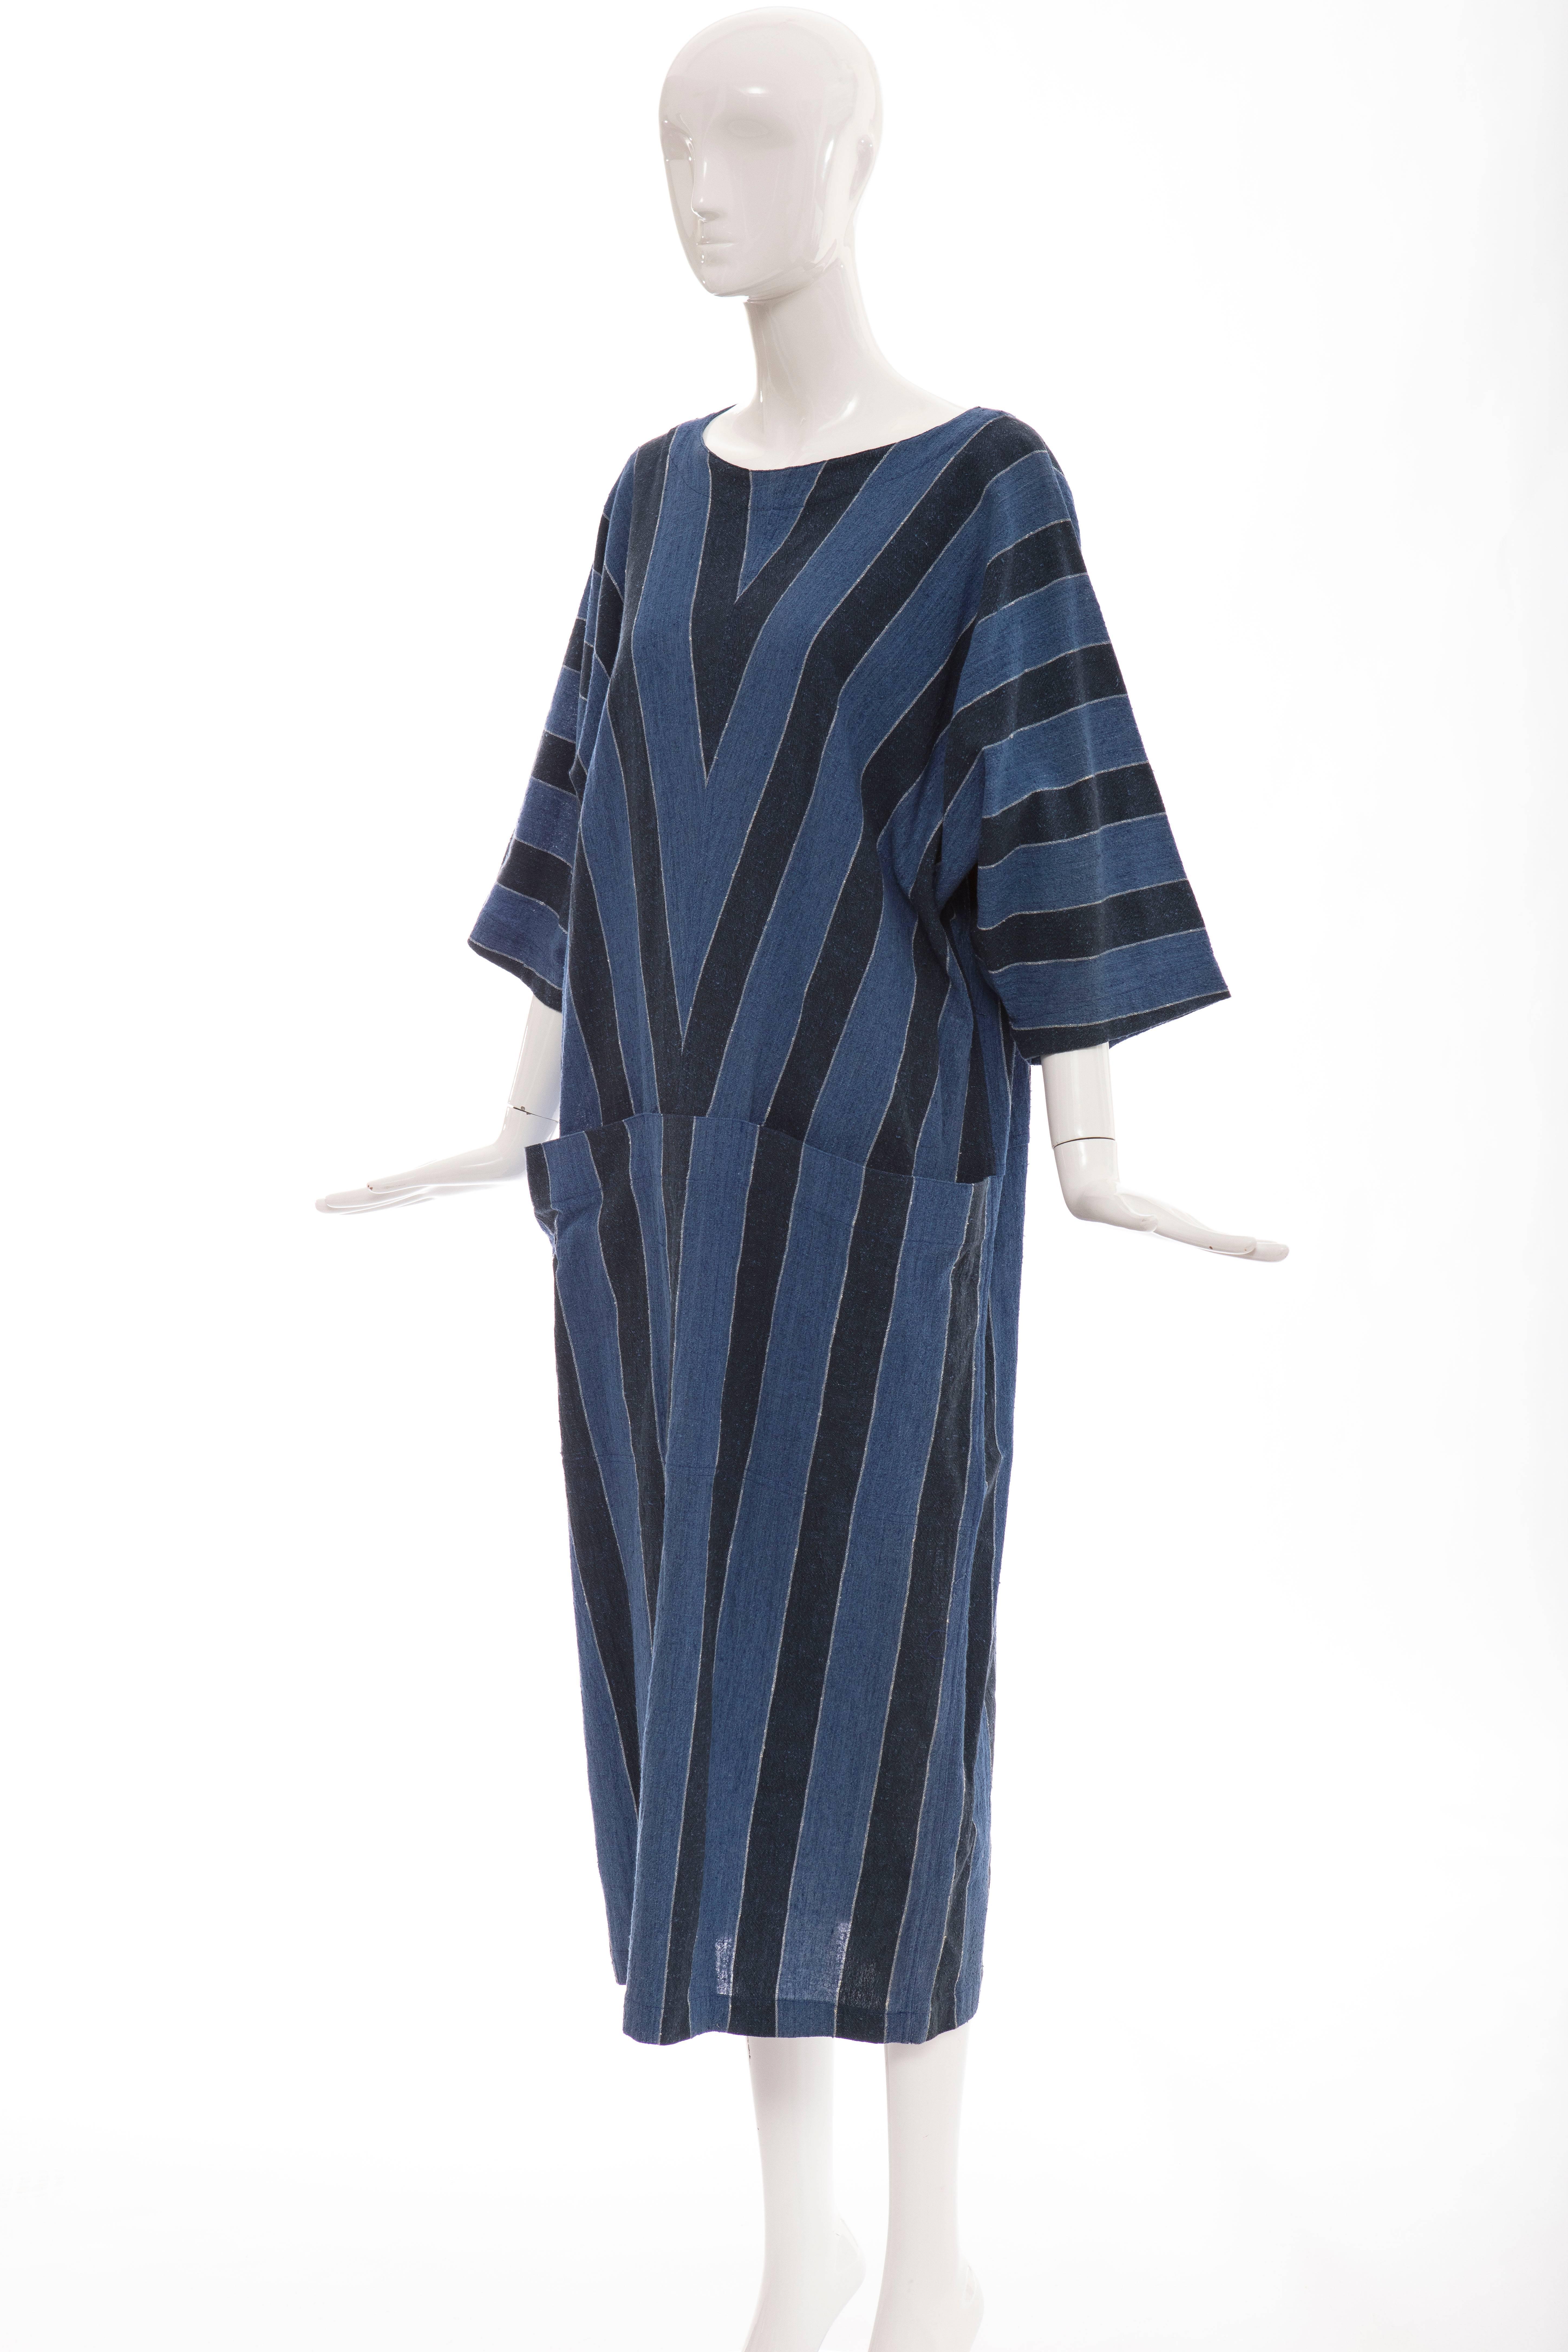 Women's Issey Miyake Plantation Woven Cotton Dress, Circa: 1980's For Sale